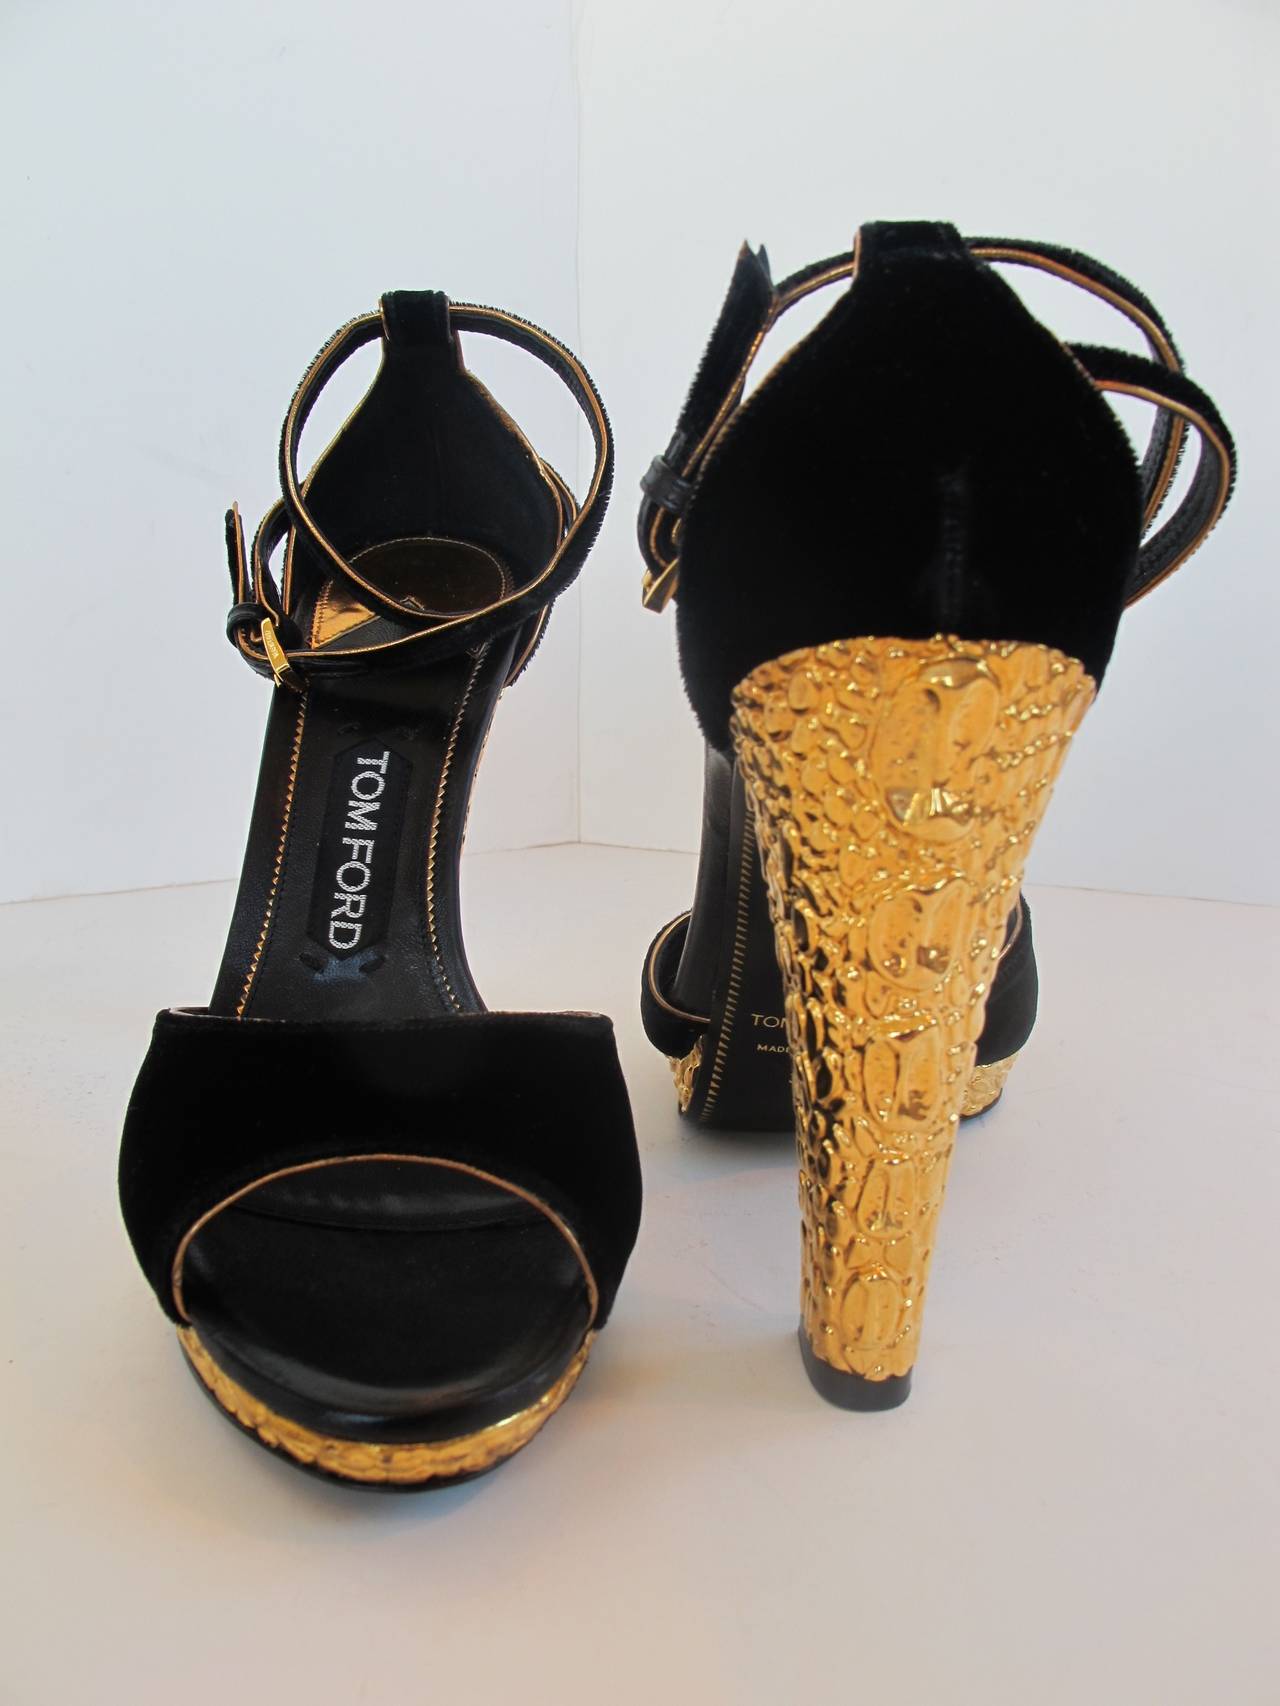 Over-the-top Tom Ford Sandals with gold metal with embossed alligator on metal. 5 inch heel. Platform 1/2 inch.